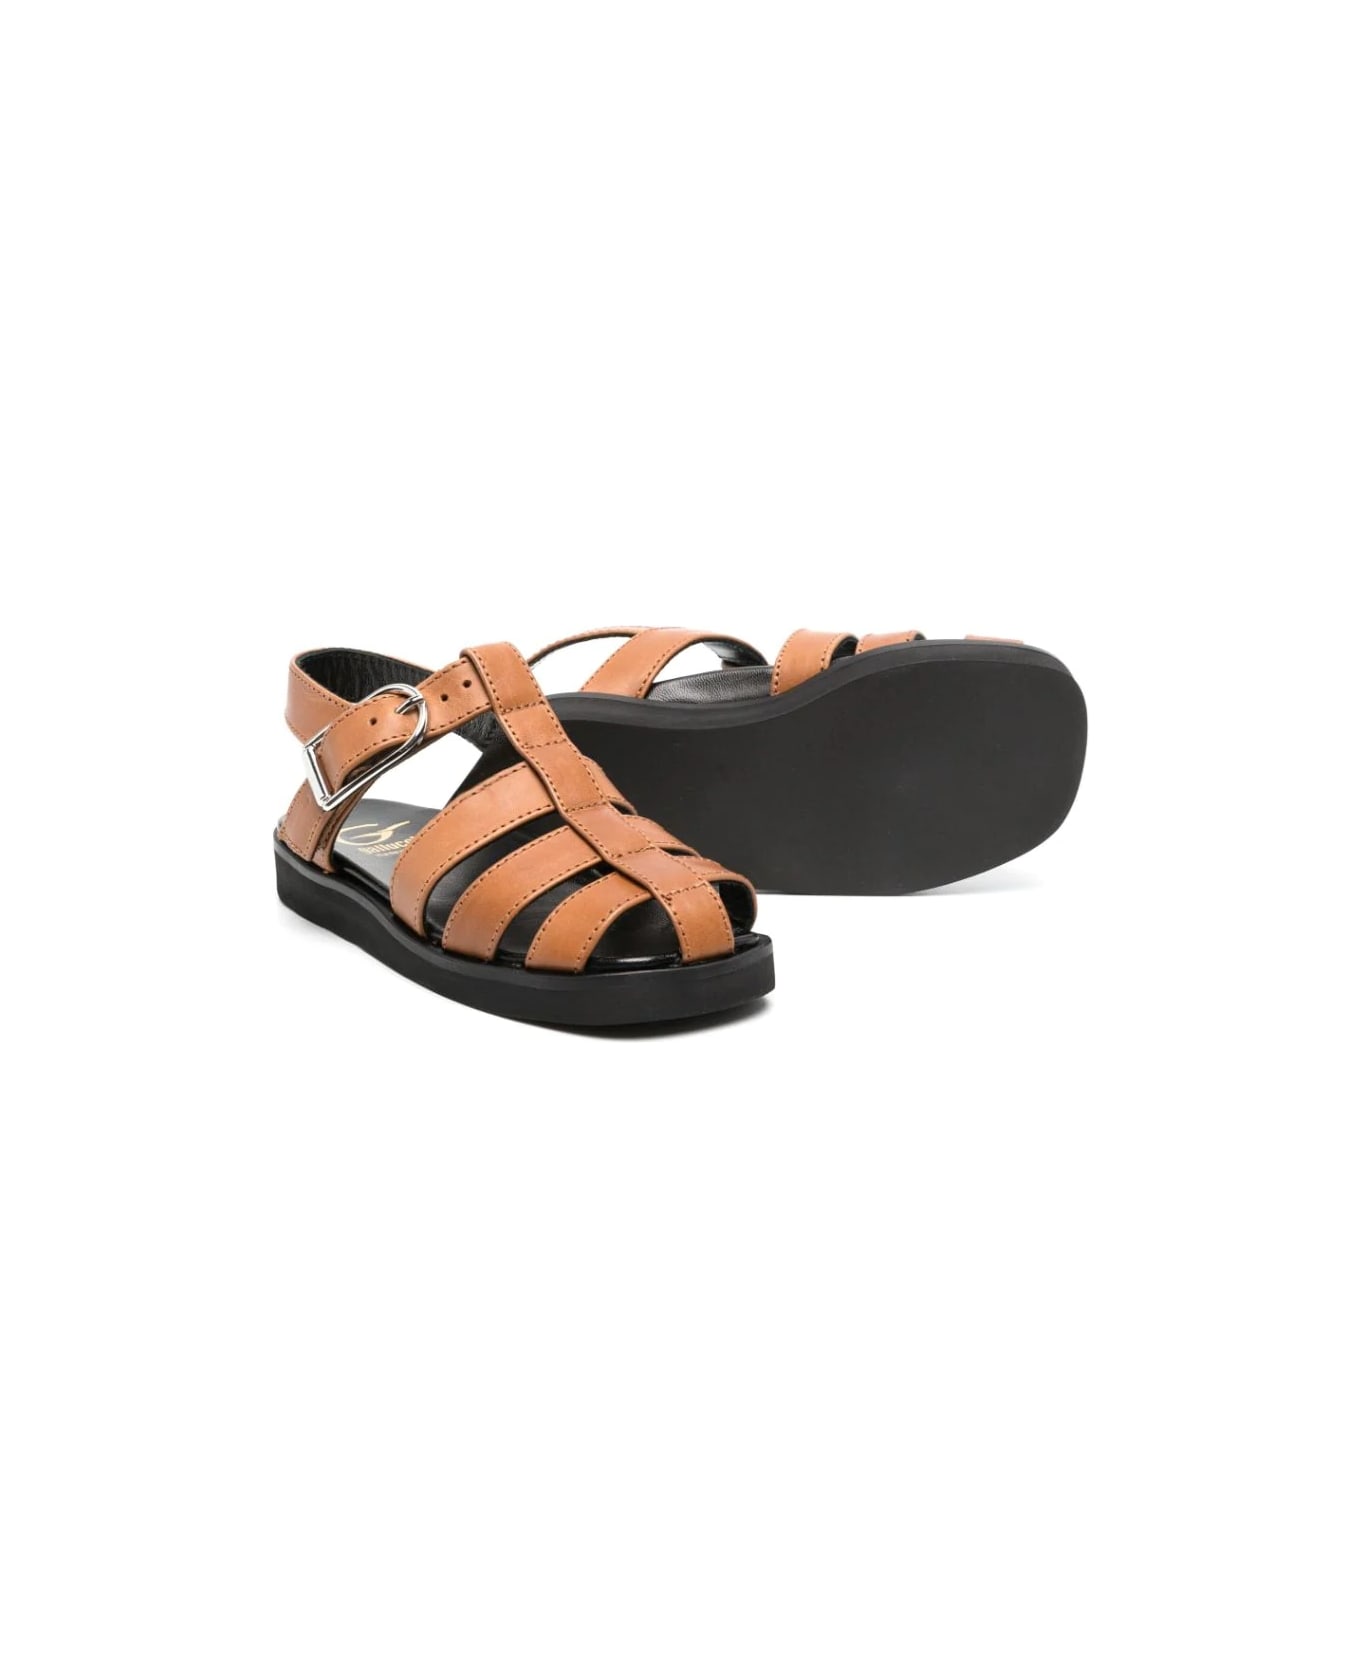 Gallucci Sandals With Buckle - Brown